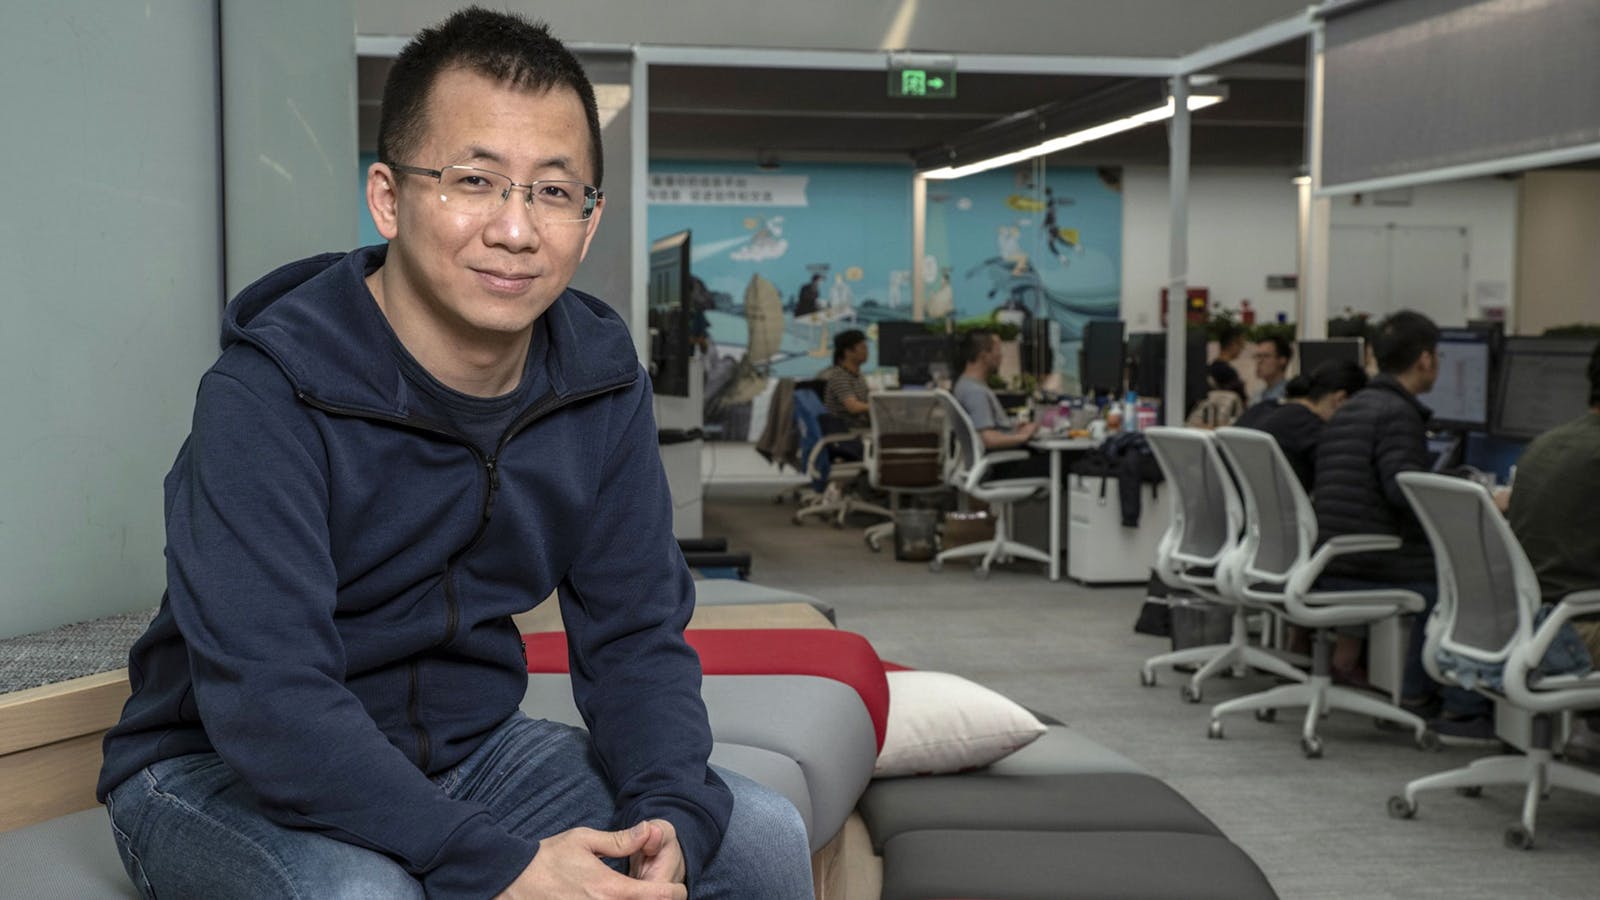 Zhang Yiming, CEO and founder of Bytedance, in Beijing. Photo by Bloomberg.